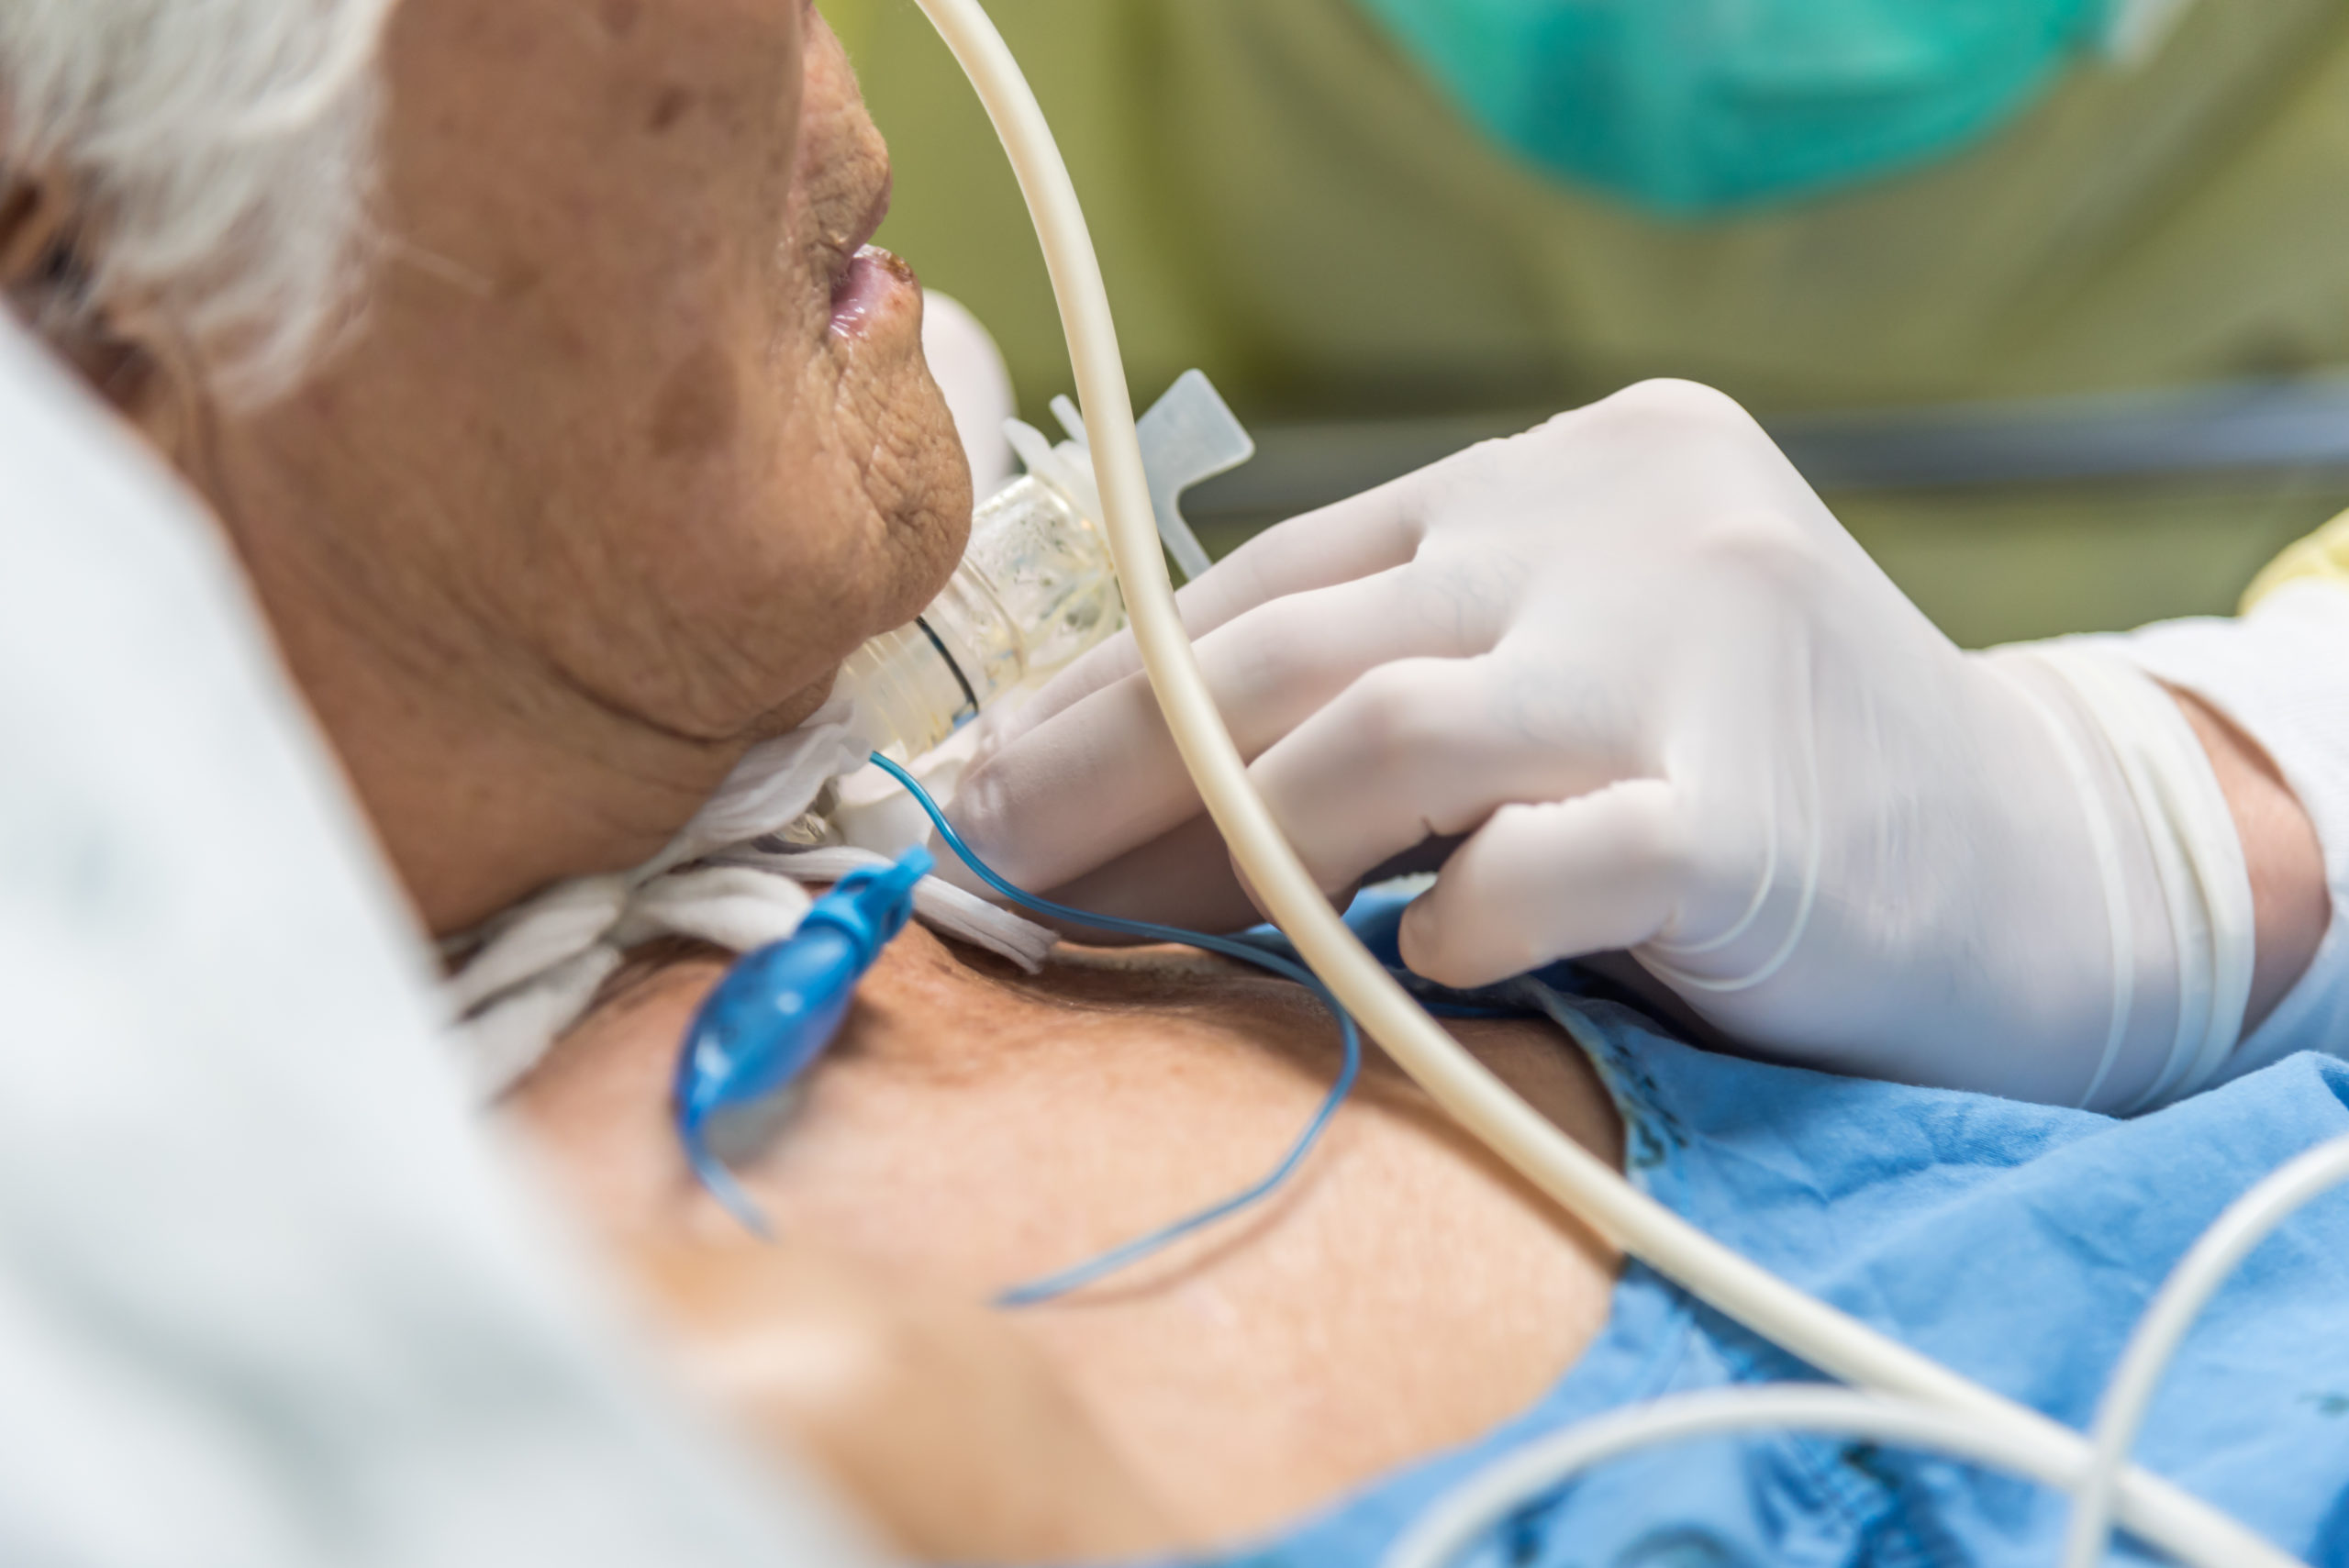 Patient with a tracheostomy and ventilator in hospital